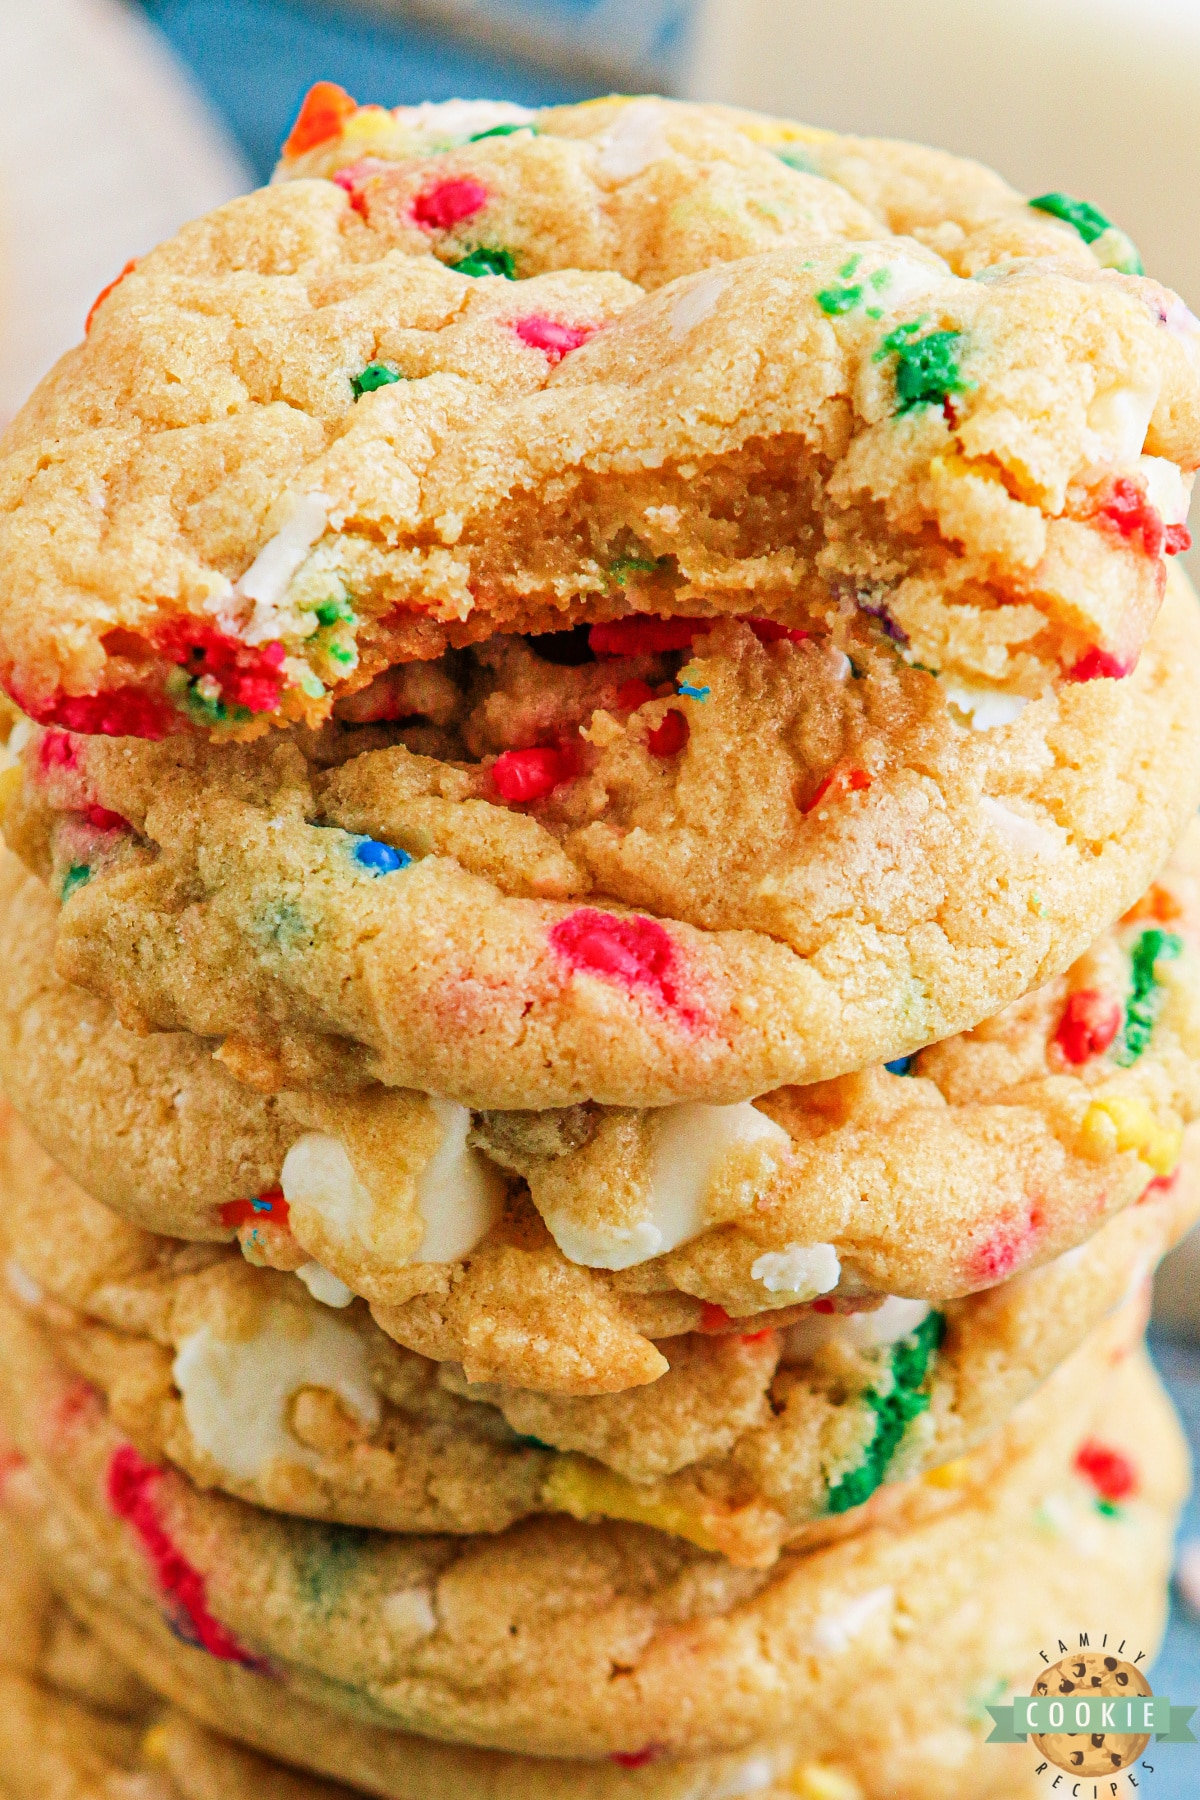 Cookies with sprinkles and white chocolate chips